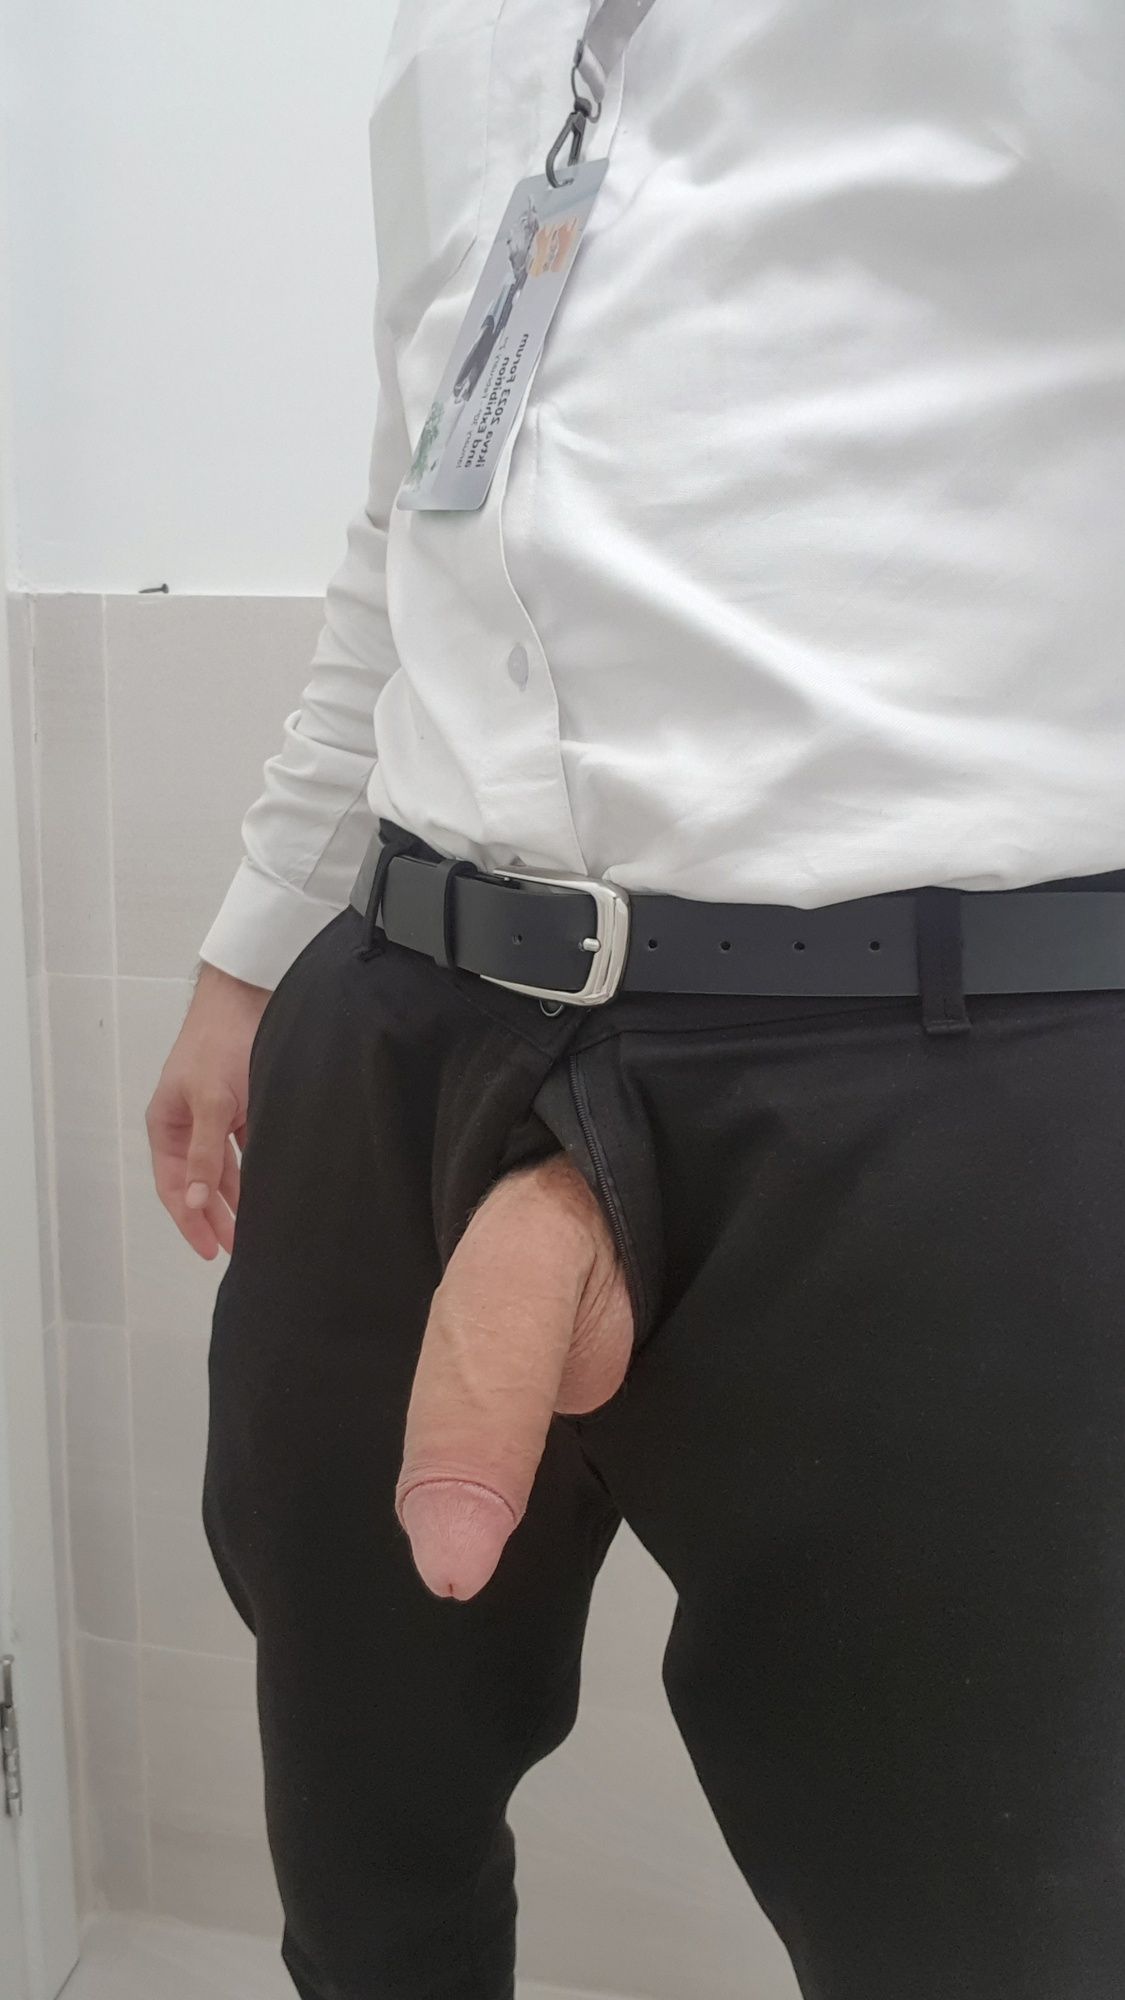 Had to let my cock out to breathe in the office toilet #3